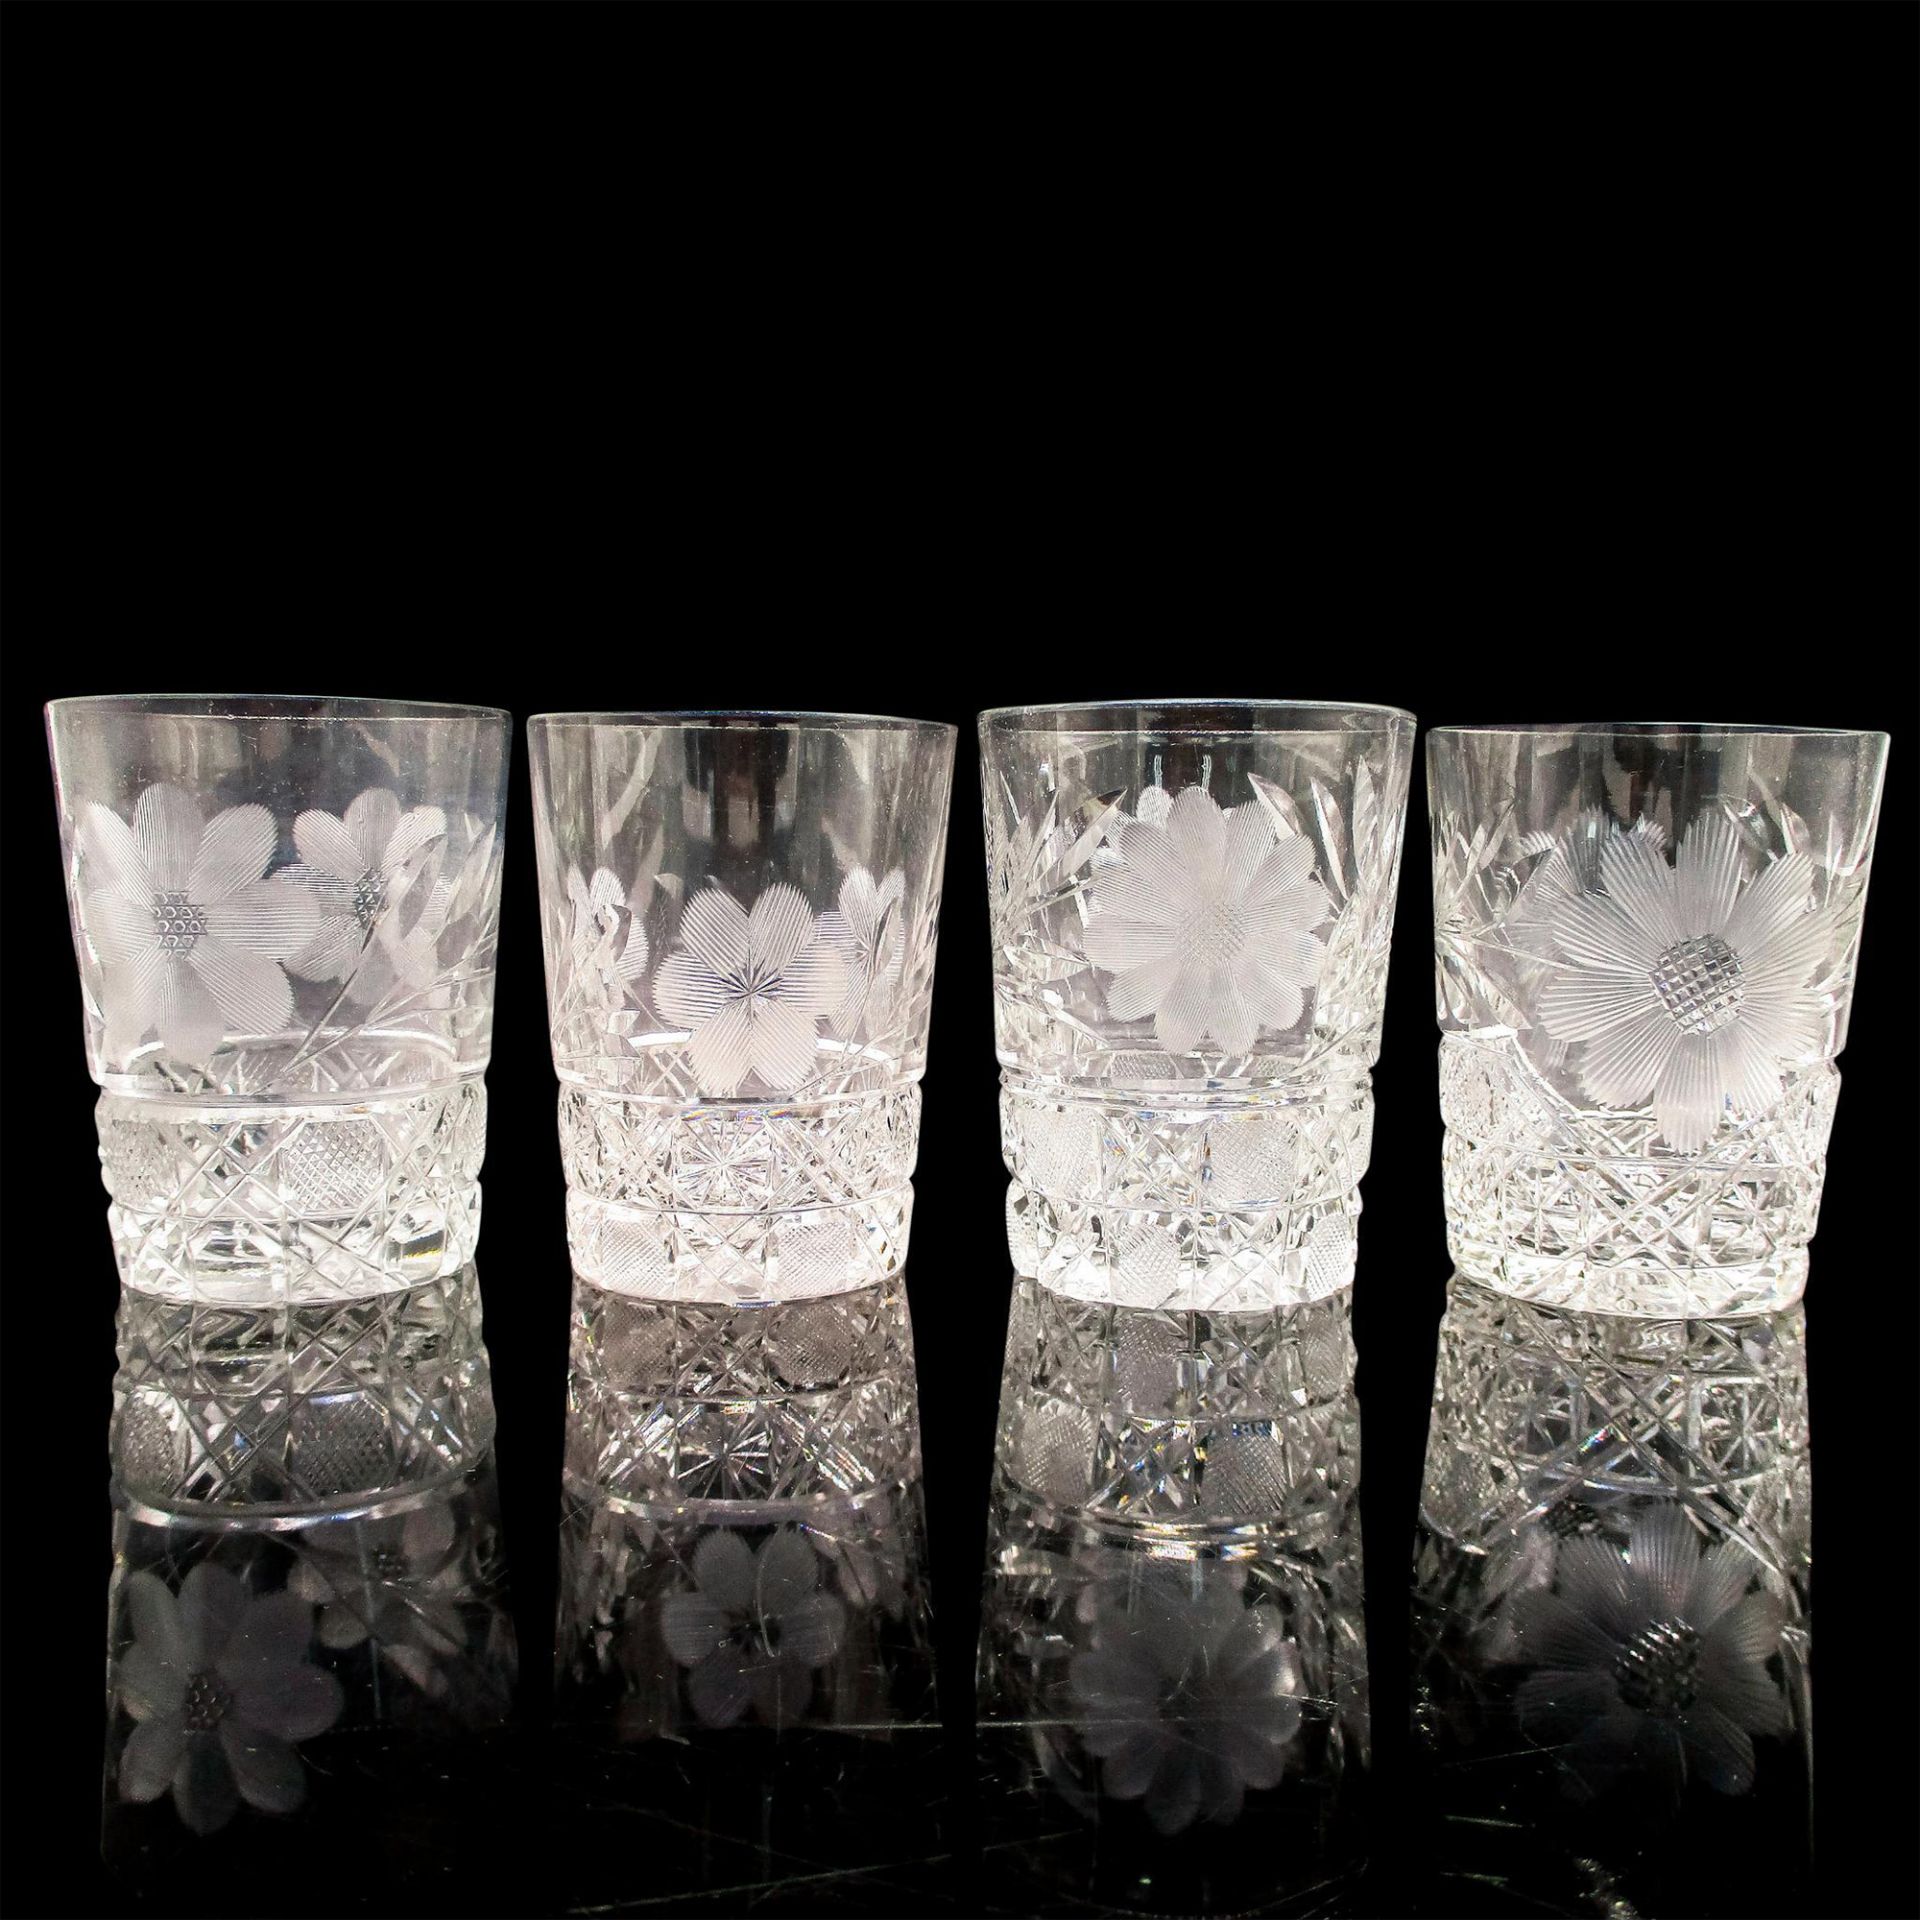 8pc Vintage Crystal Etched Whiskey Glasses - Image 3 of 8